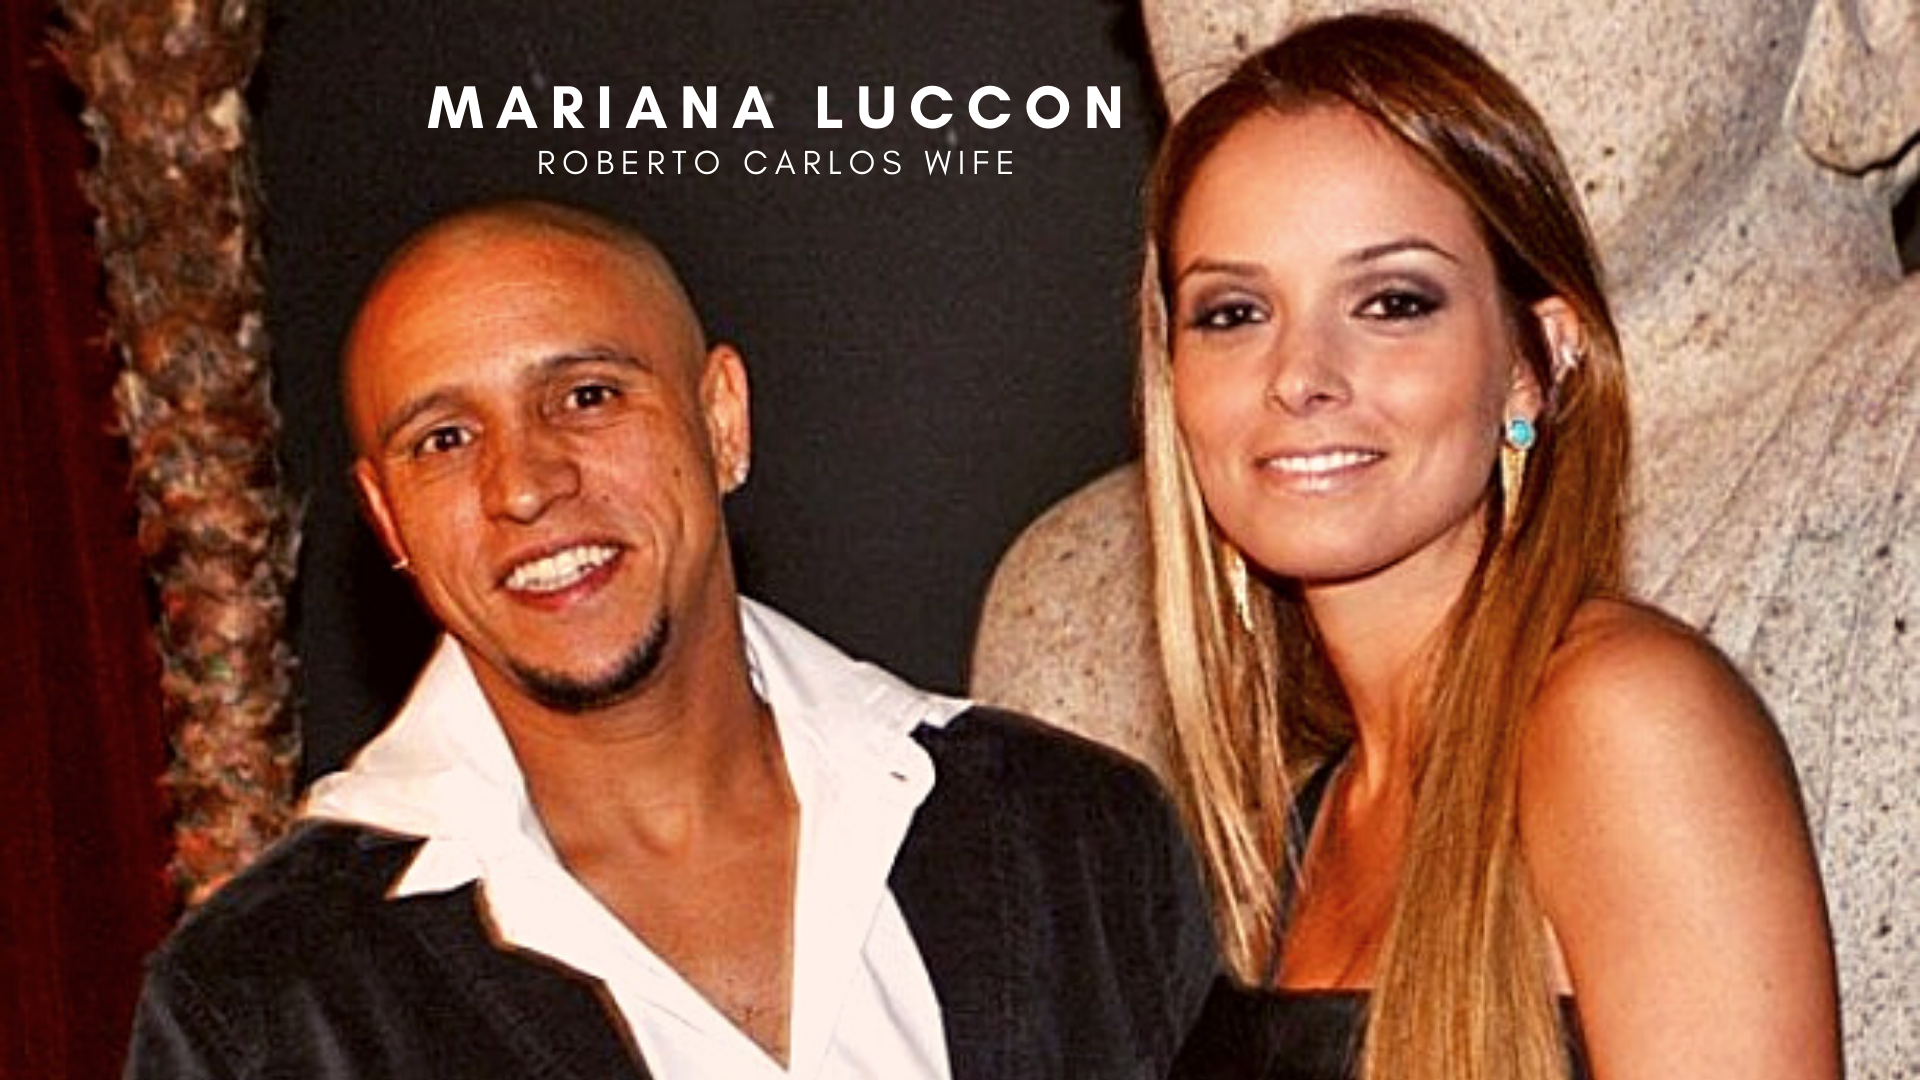 Roberto Carlos with his wife, Mariana Luccon. (Picture was taken from woodgram.com)